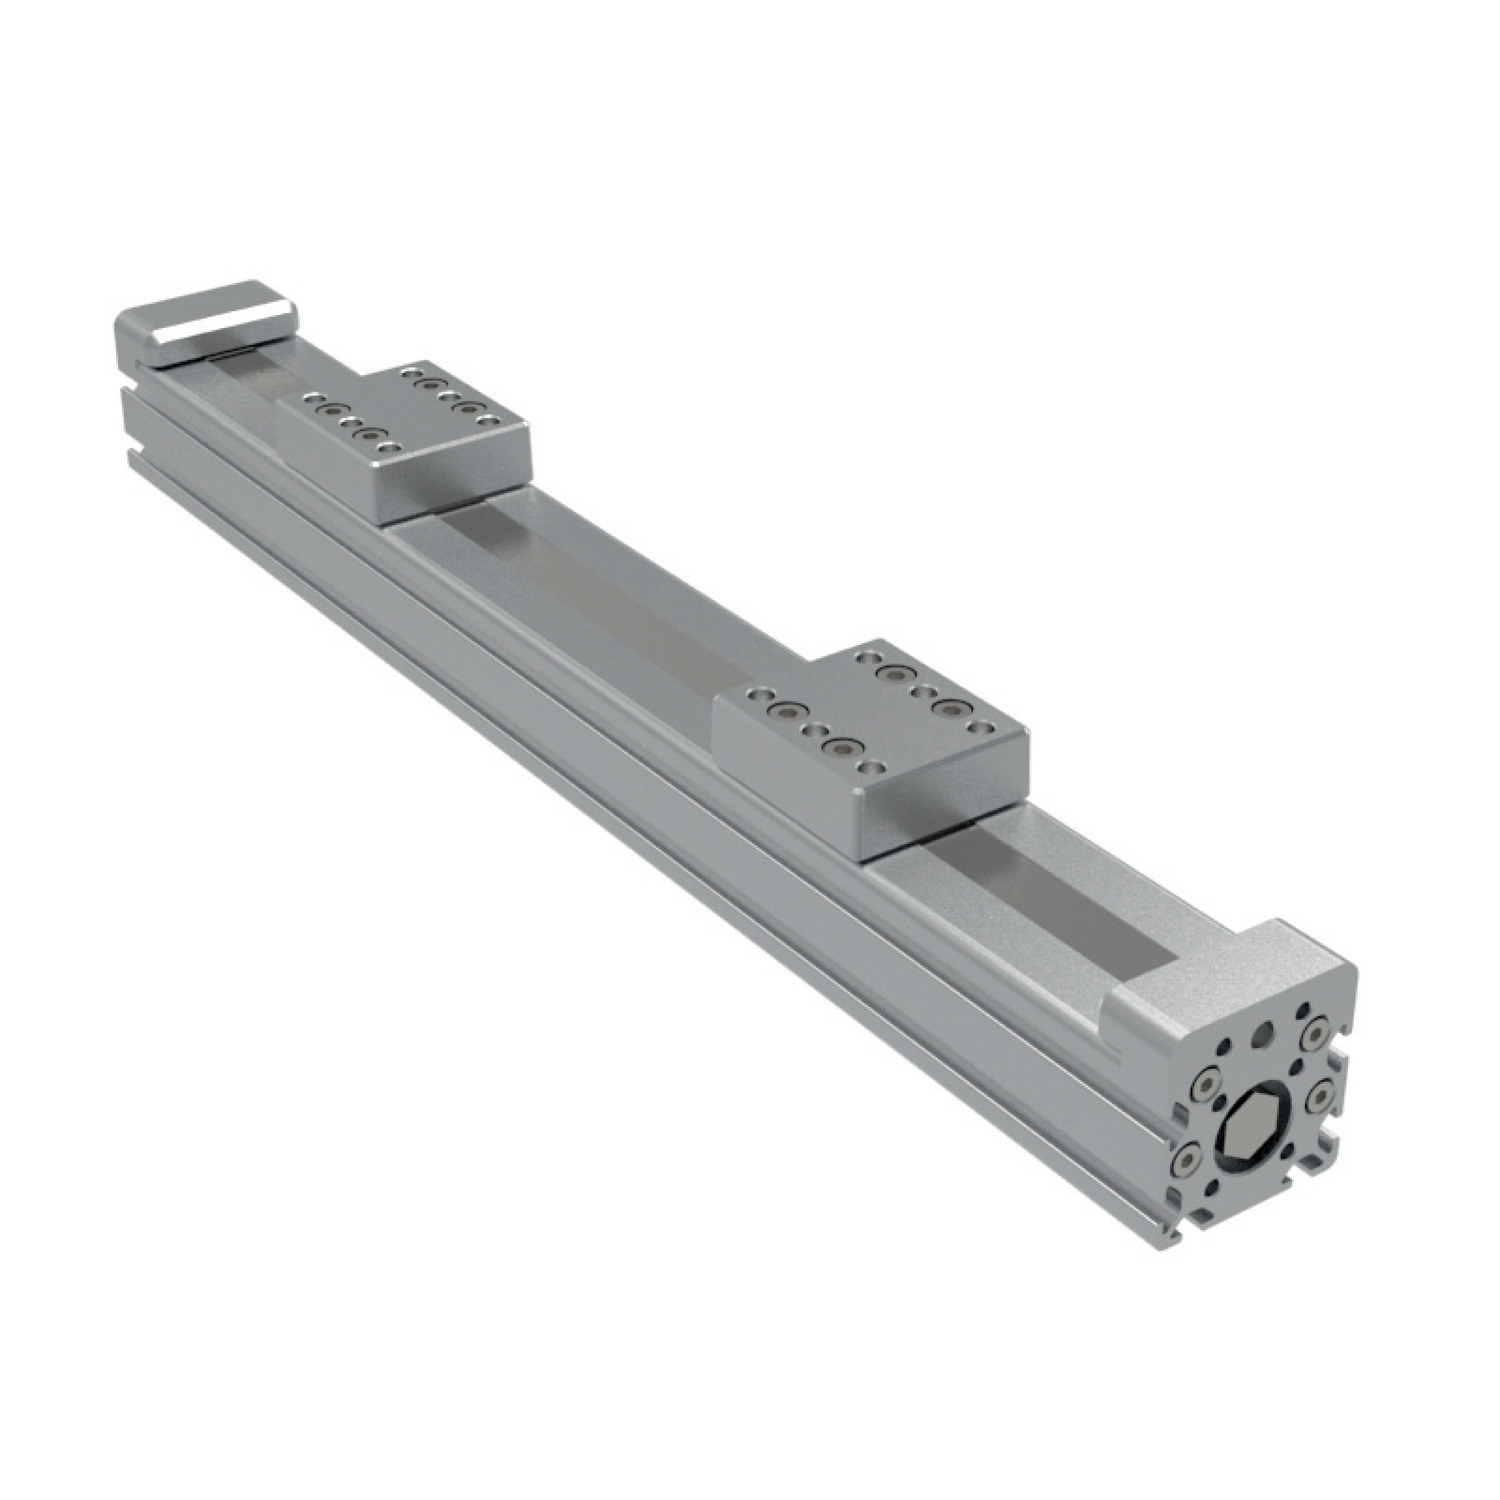 L3147.D - Lead Screw Linear Stages